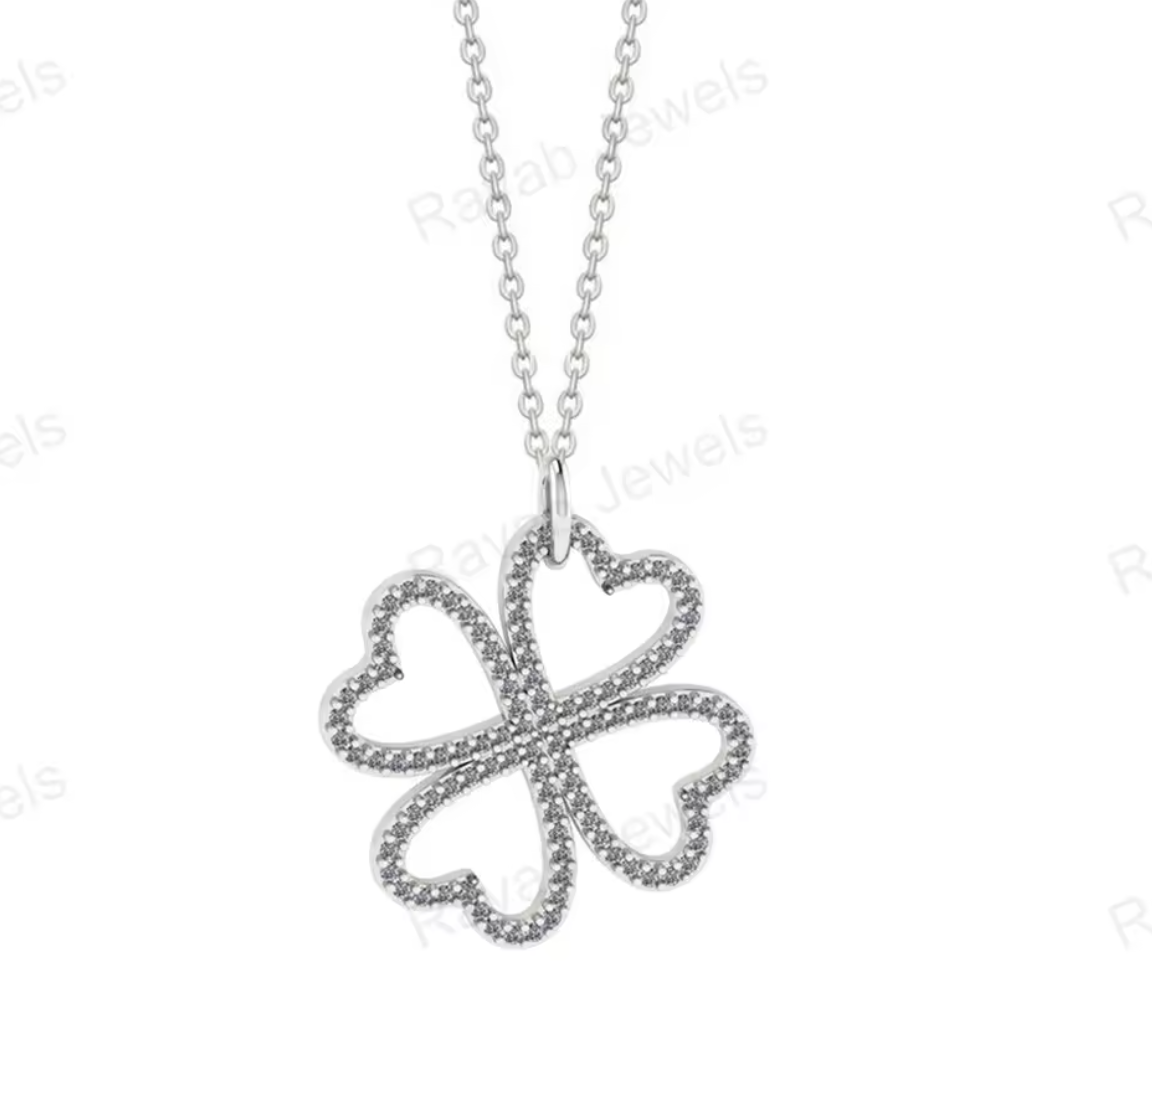 Girls four leaf clover low price 36mm luxury gold plated necklace gift jewelry